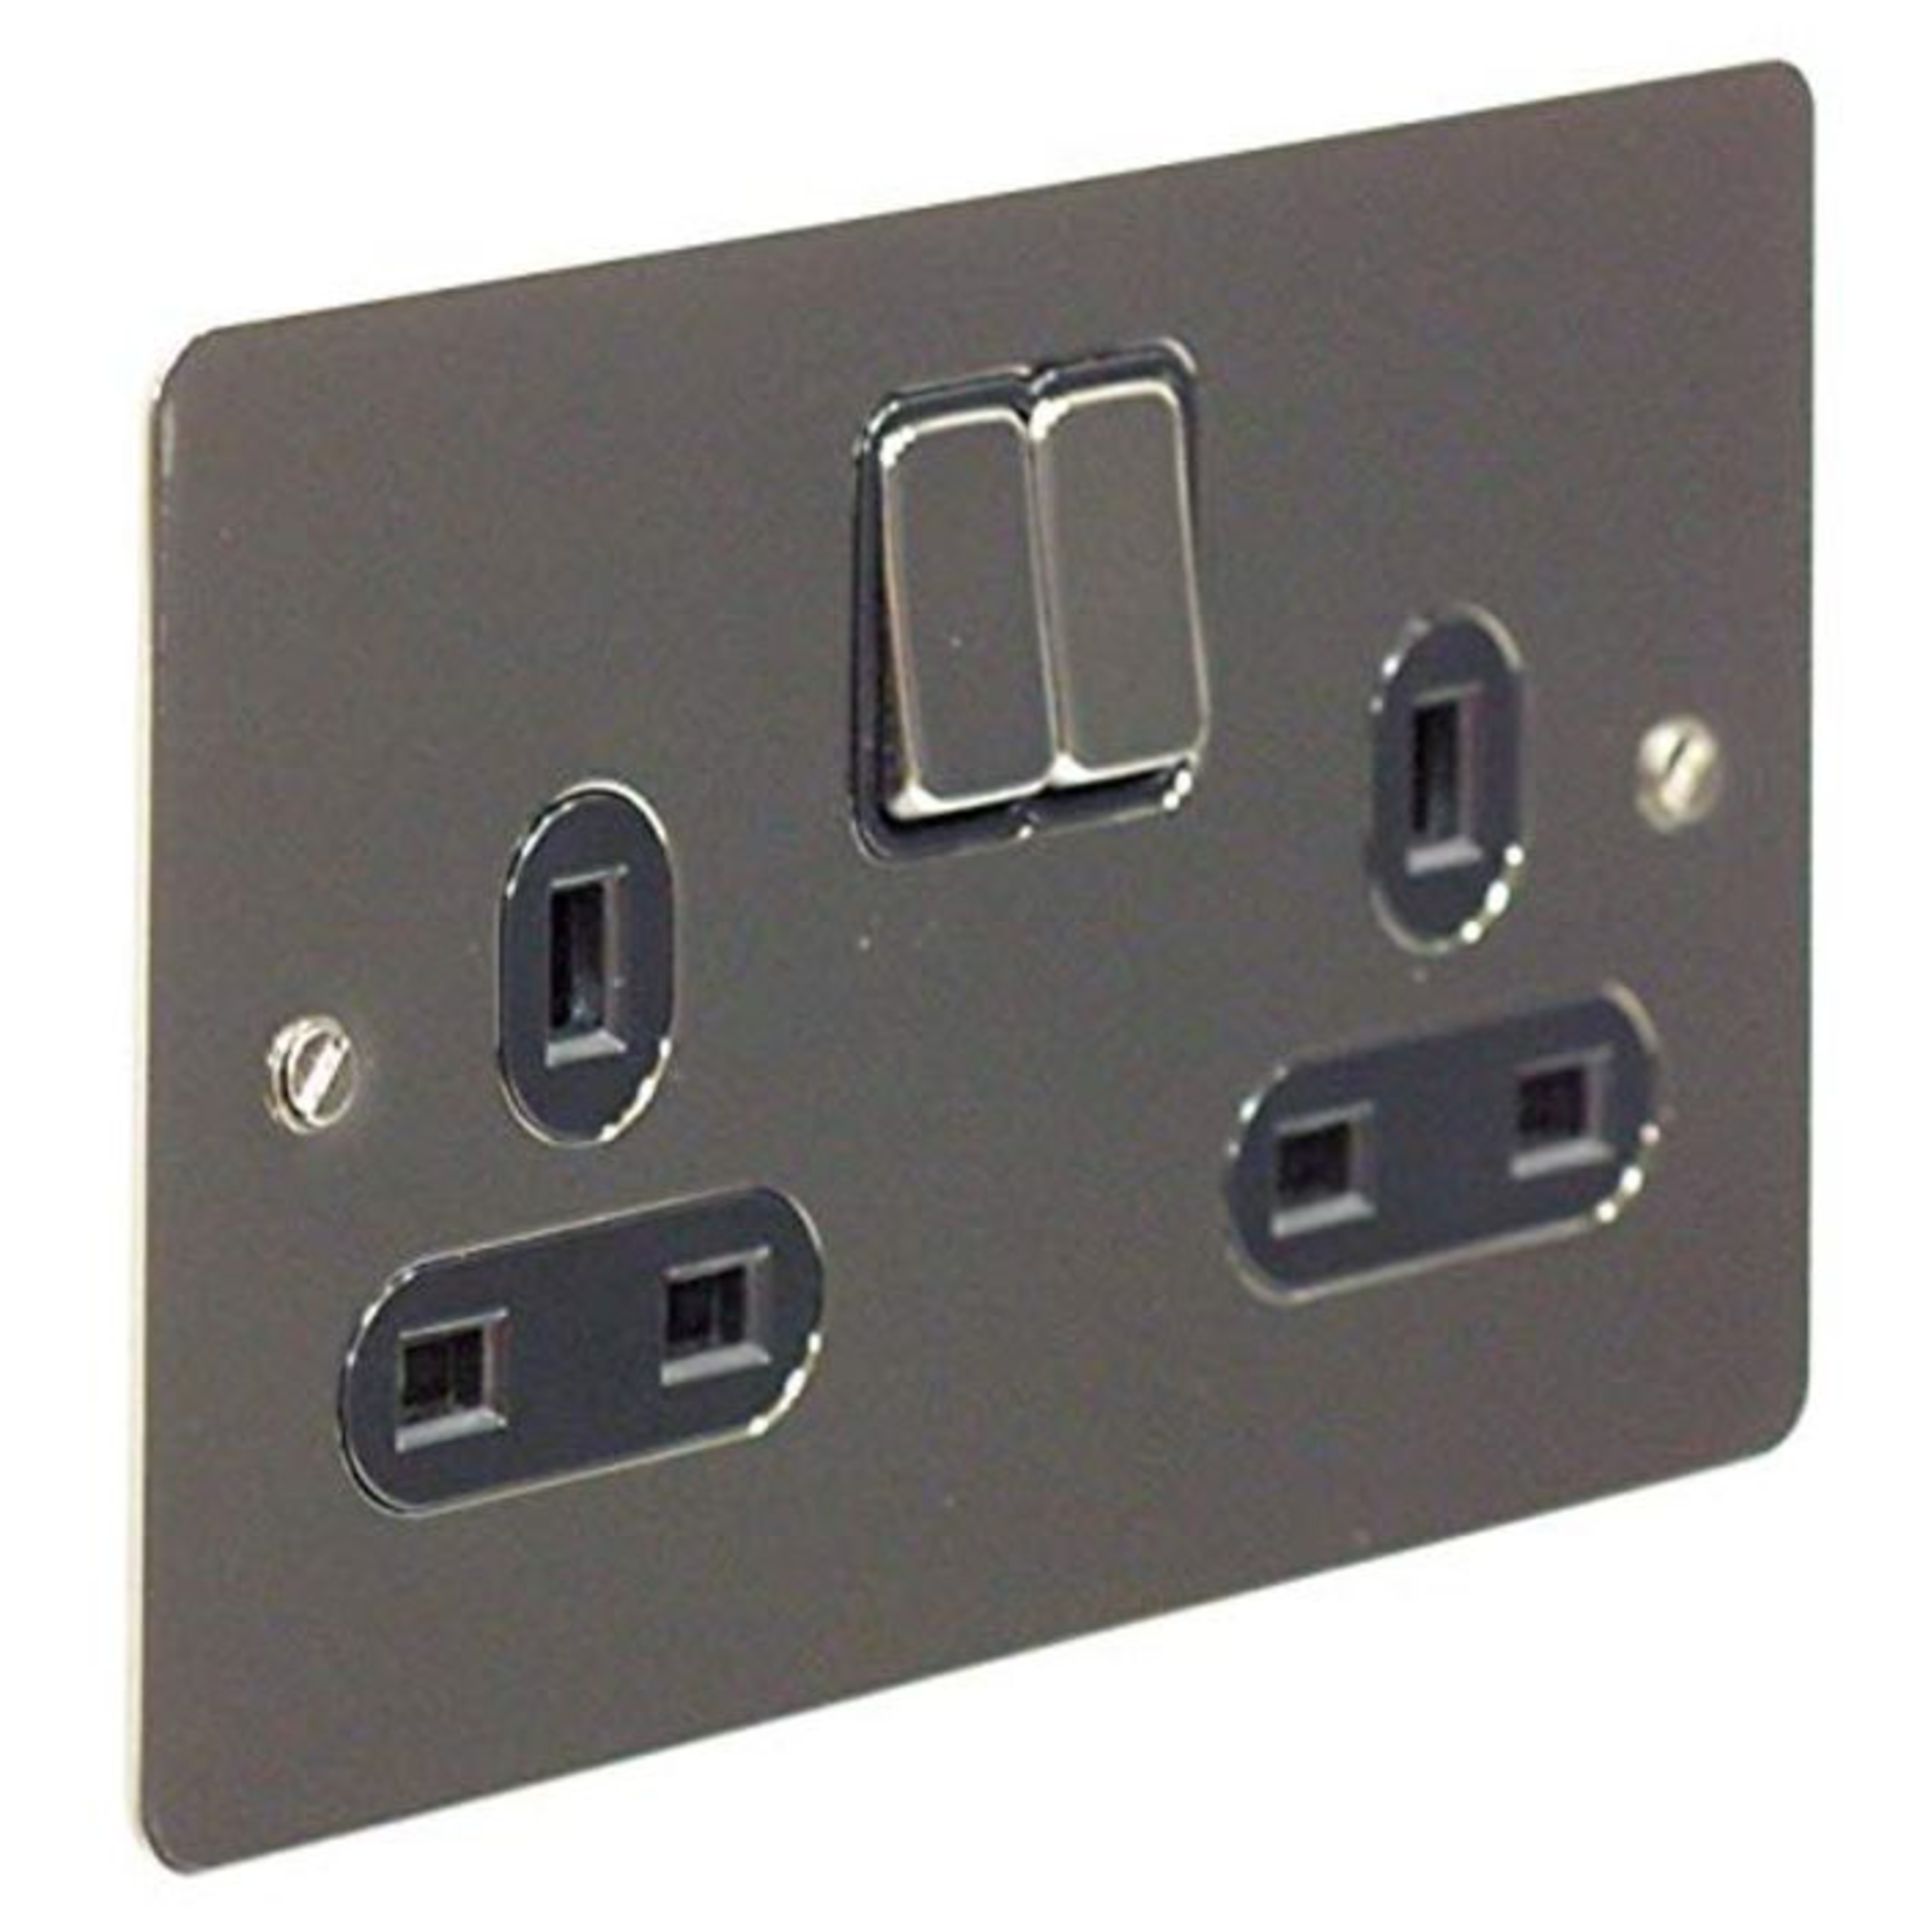 Schneider Electric Ultimate Flat Plate - Switched Double Power Socket, Double Pole, 13